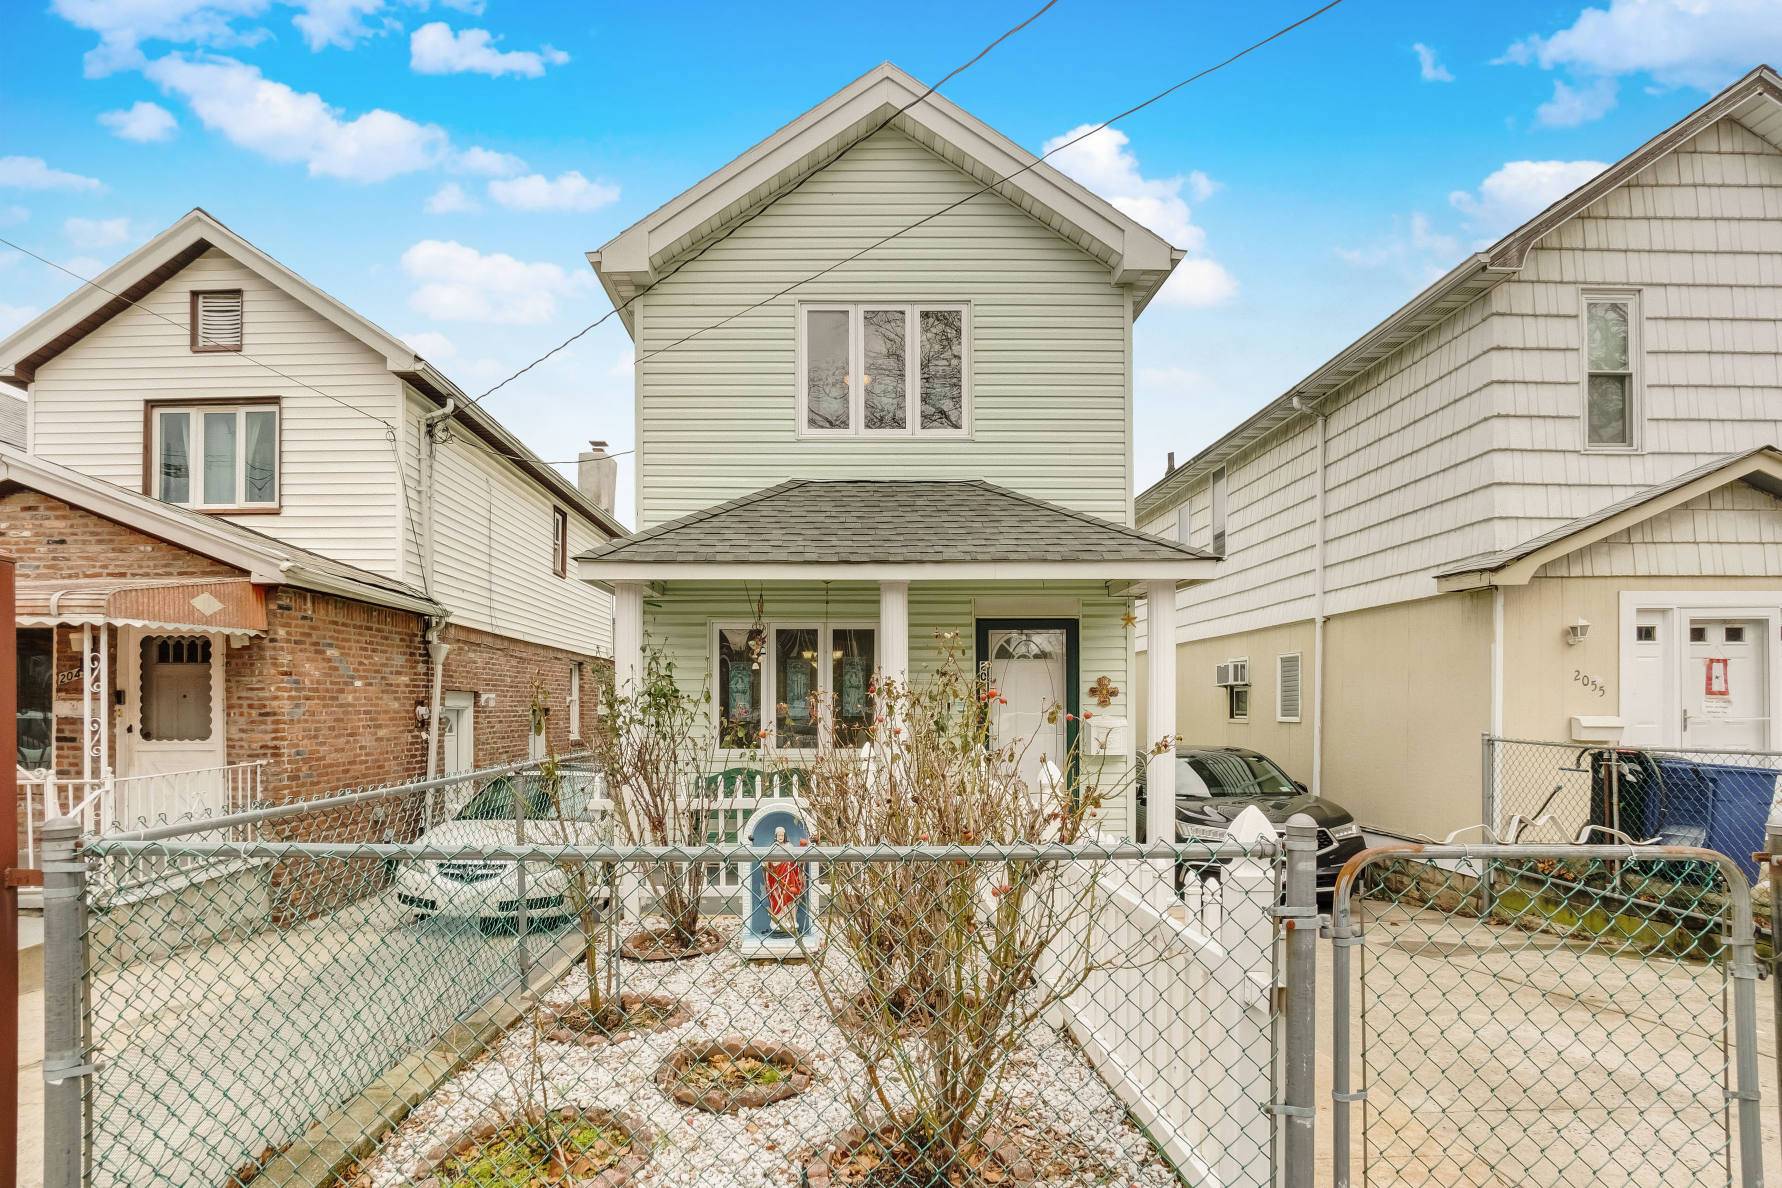 One of the largest single family homes available in Old Mill Basin, this four bedroom and two and half bath duplex with a finished basement has just hit the market ...